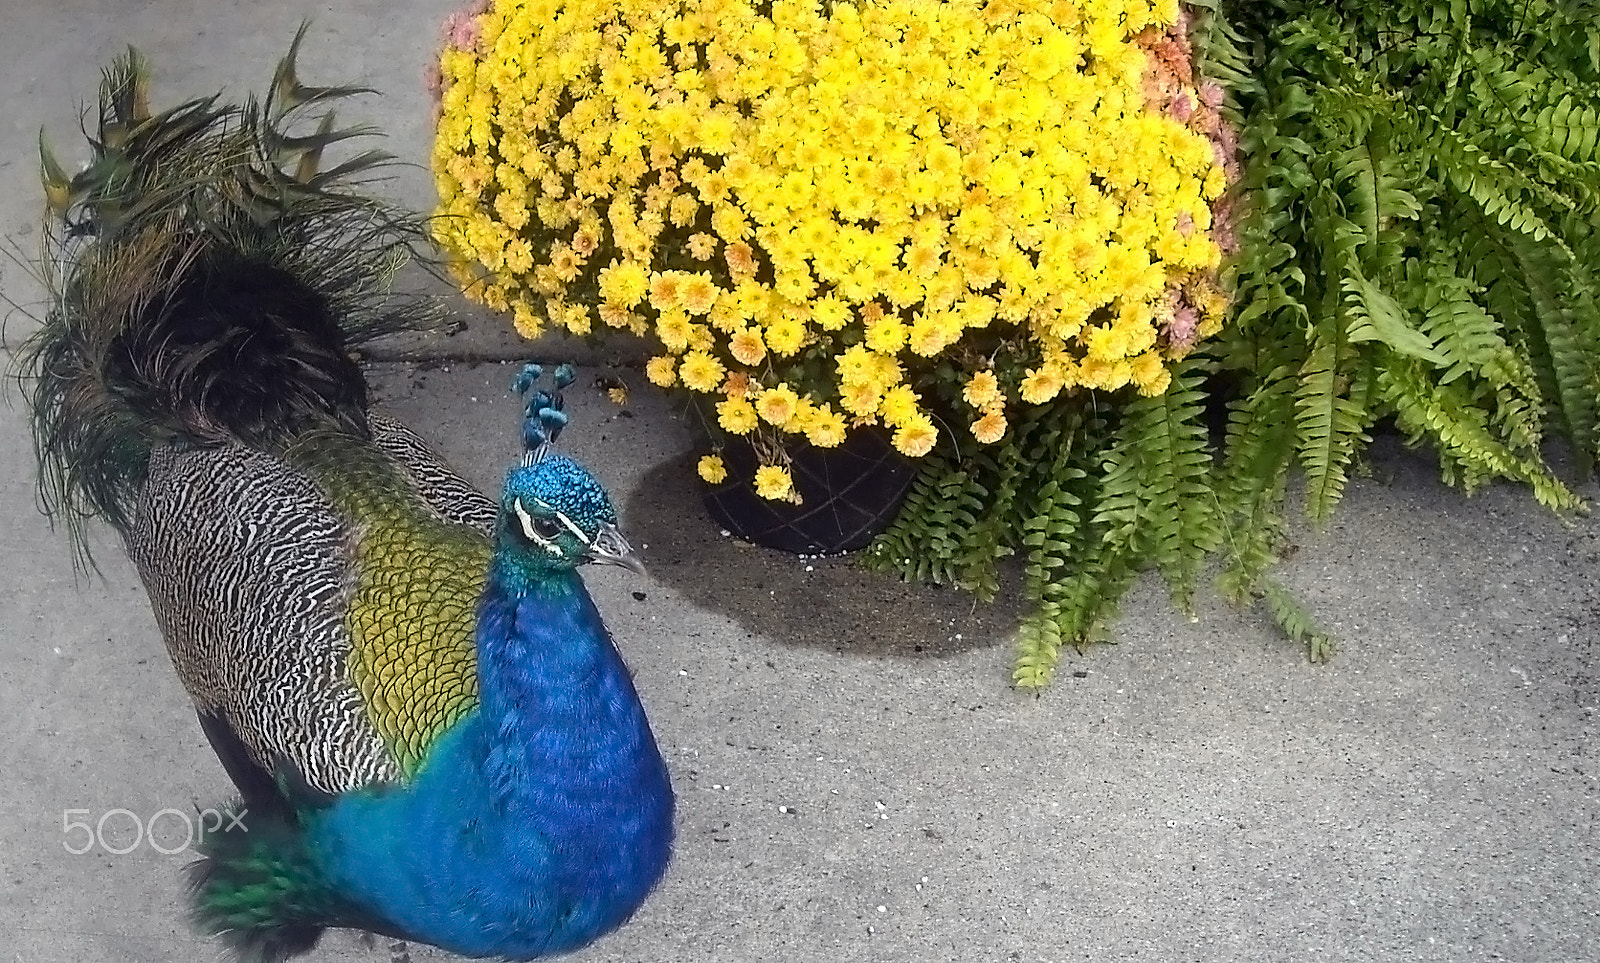 Nikon Coolpix L18 sample photo. Peacock and flowers photography